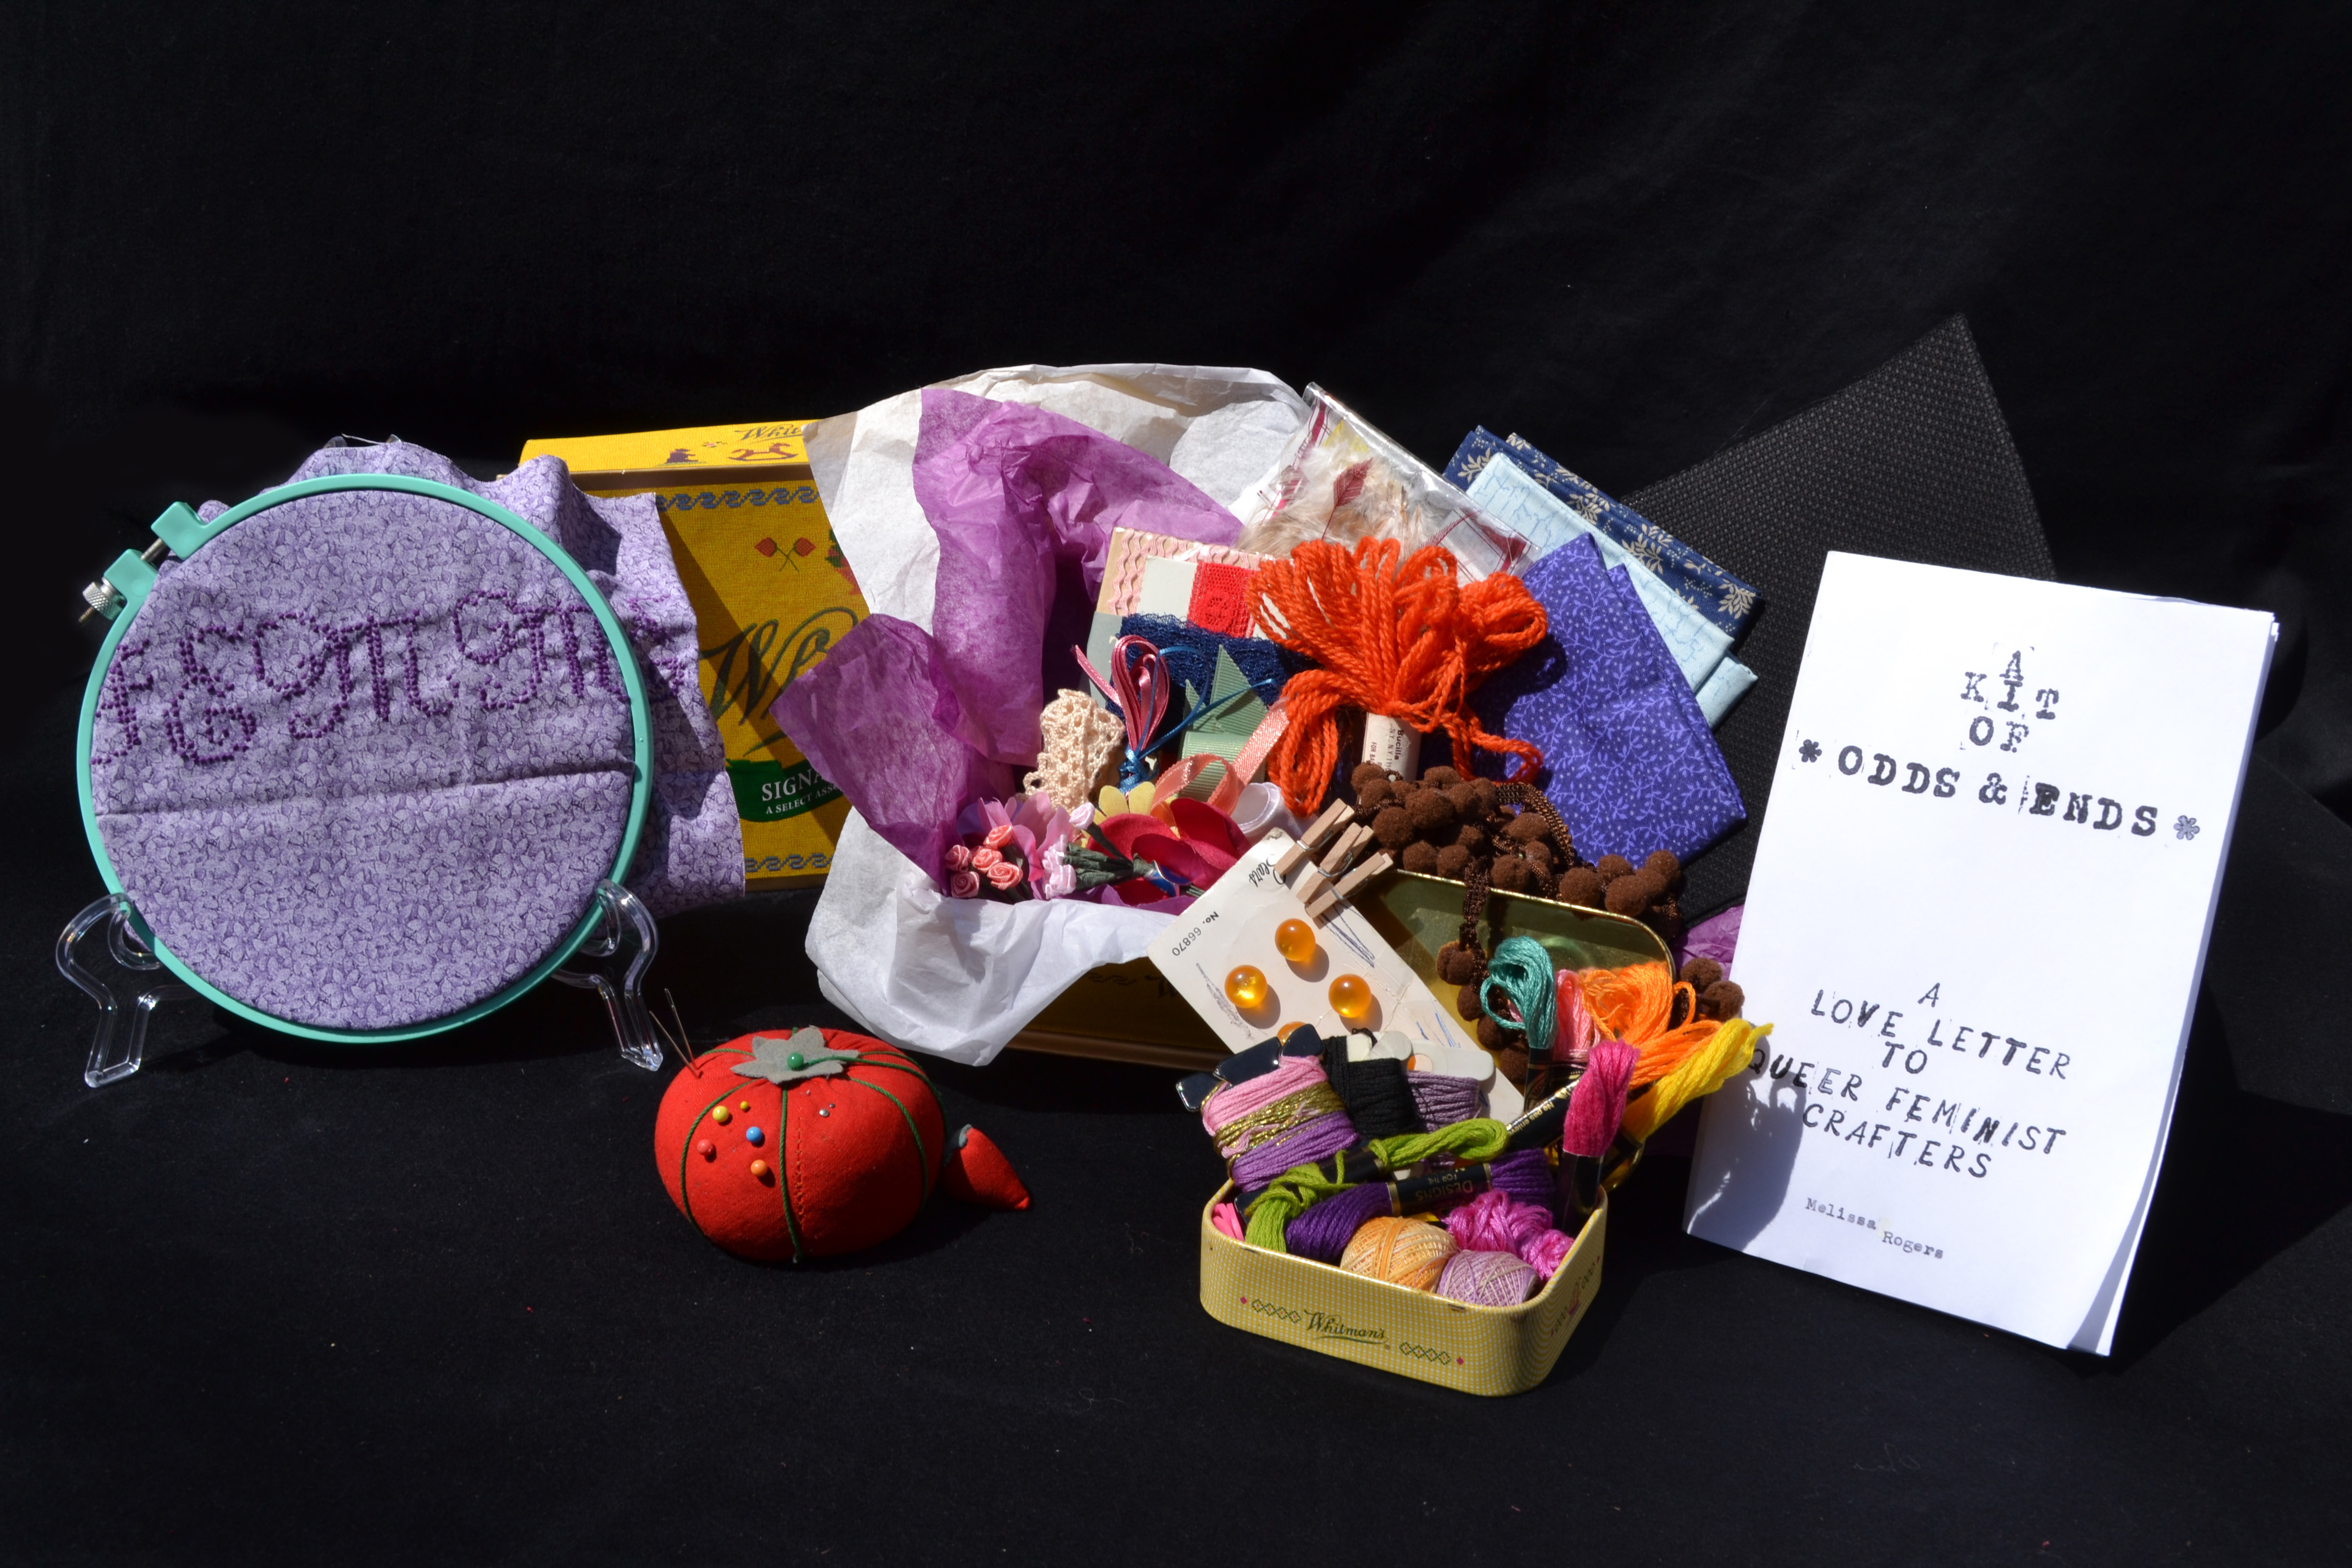 Contents of the kit arranged against a black backdrop including an embroidery hoop, a pincushion, the zine, and a large and small box stuffed with craft materials